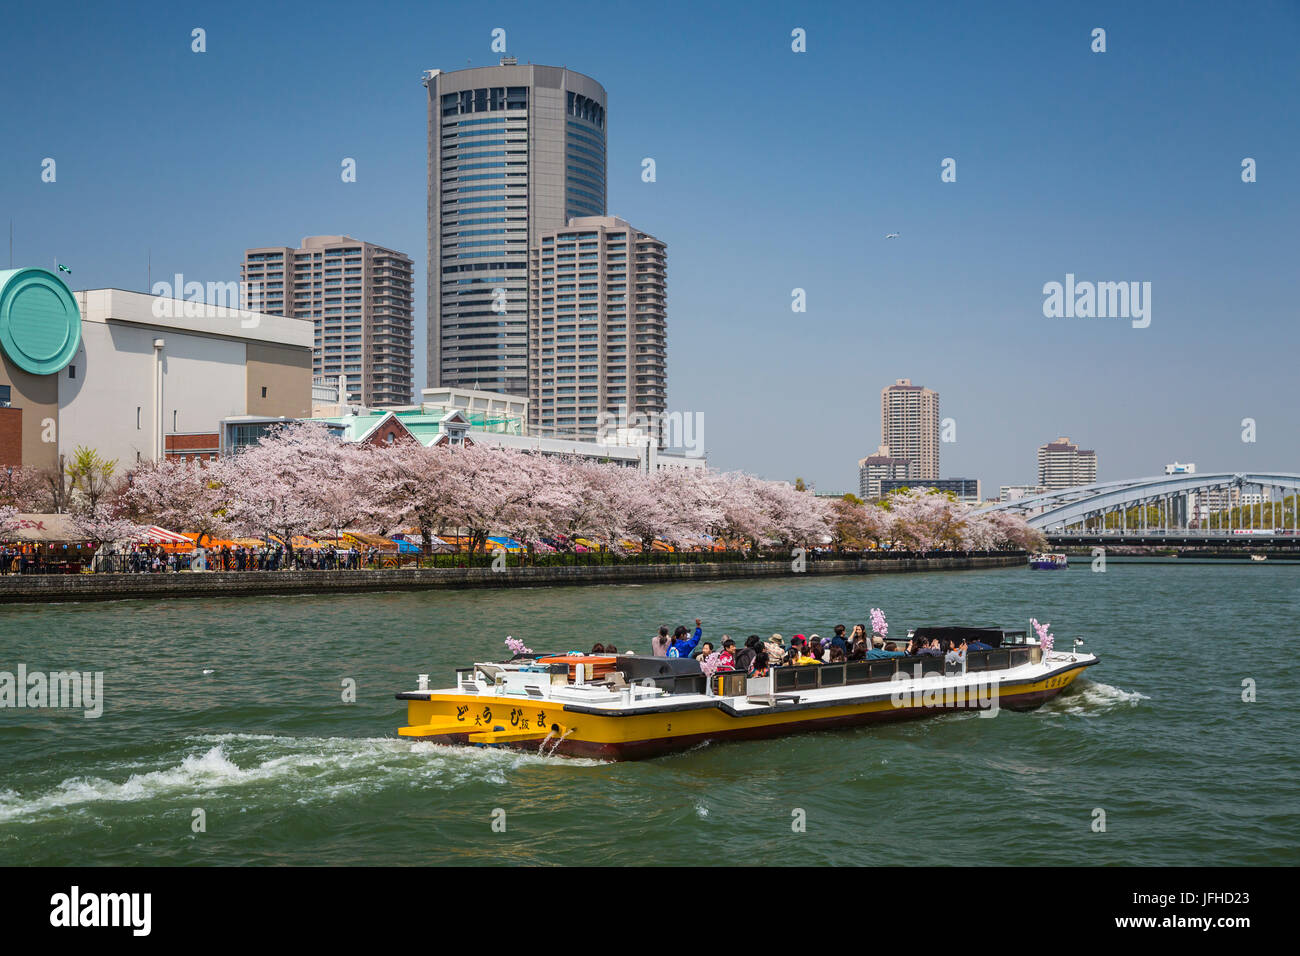 A sightseeing tour boat on the Okawa River near The Mint in Osaka, Japan. Stock Photo